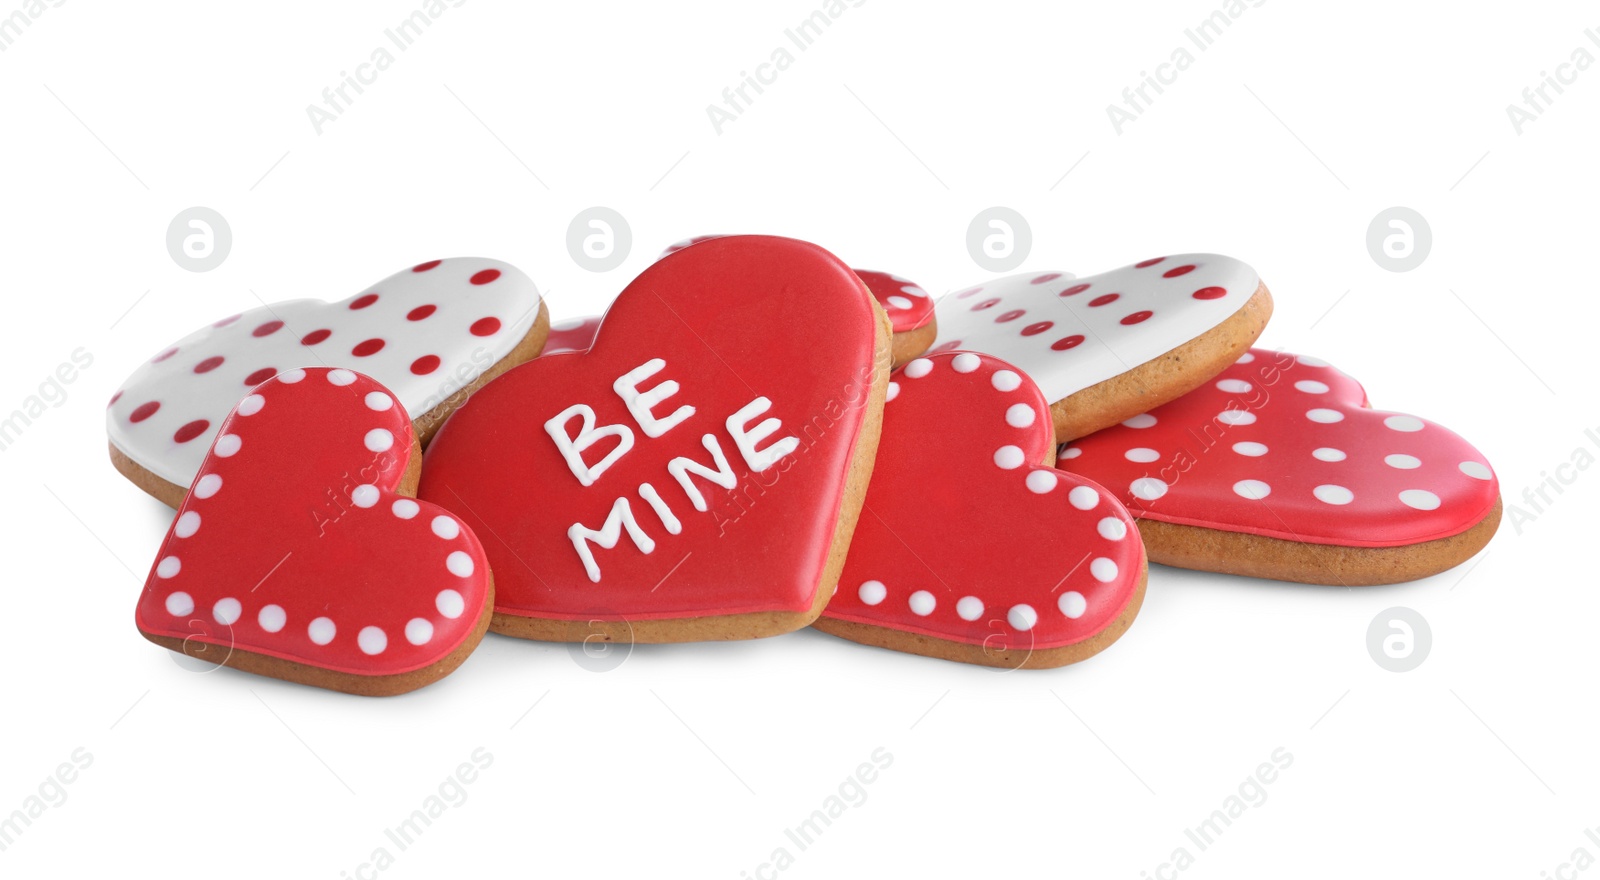 Photo of Delicious heart shaped cookies on white background. Valentine's Day